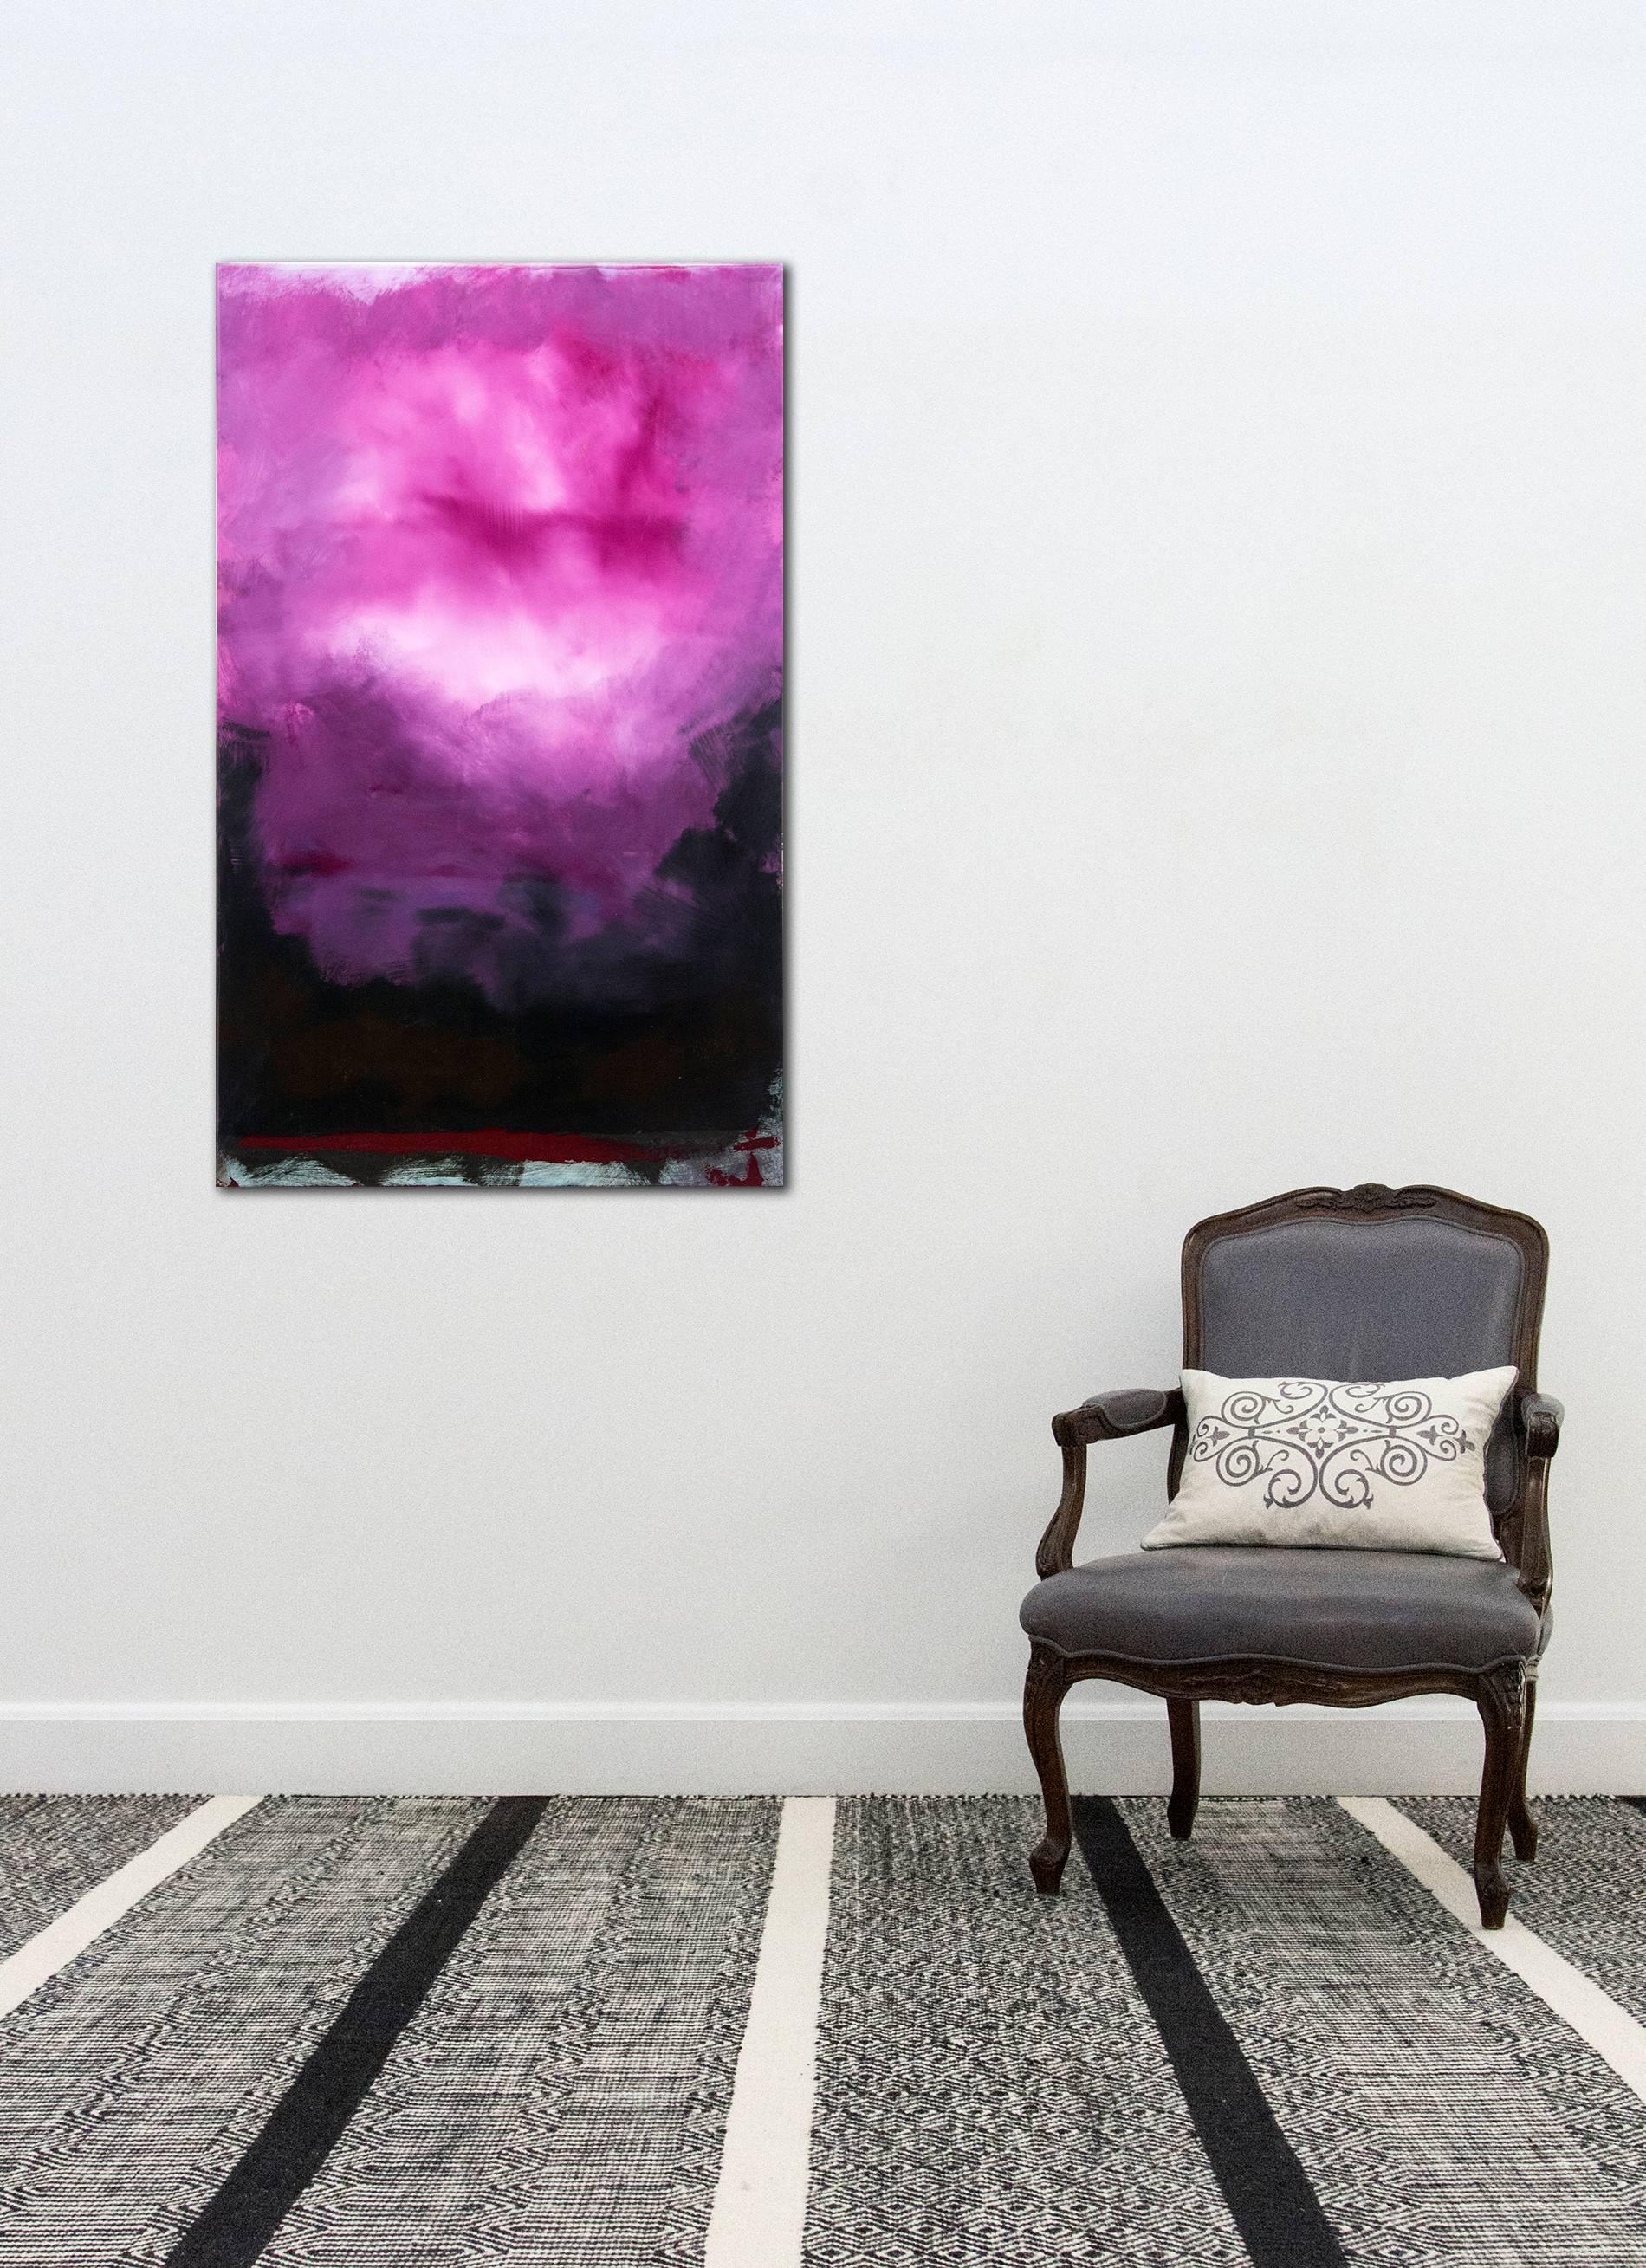 A brilliant and stormy violet sky rises from a dark horizon in this emotive landscape by Jay Hodgins.  Layers of saturated color coated with glossy resin create depth, light and atmosphere. This work is part of the Rujuh series. Rujuh is Indonesian